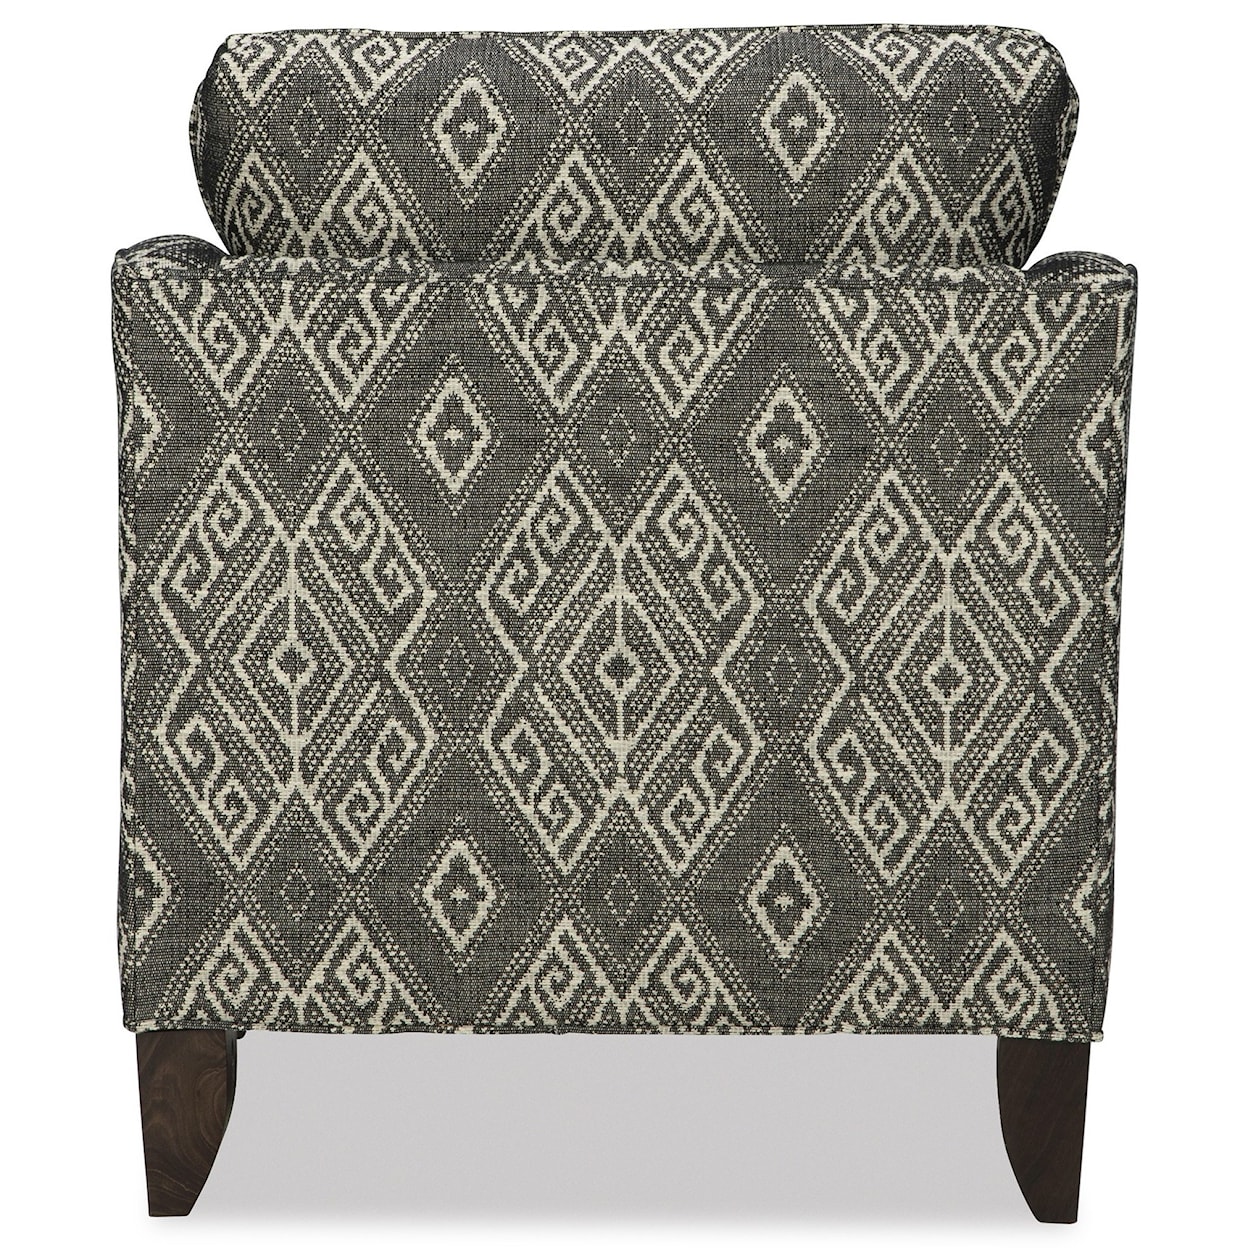 Hickorycraft Accent Chairs Chair